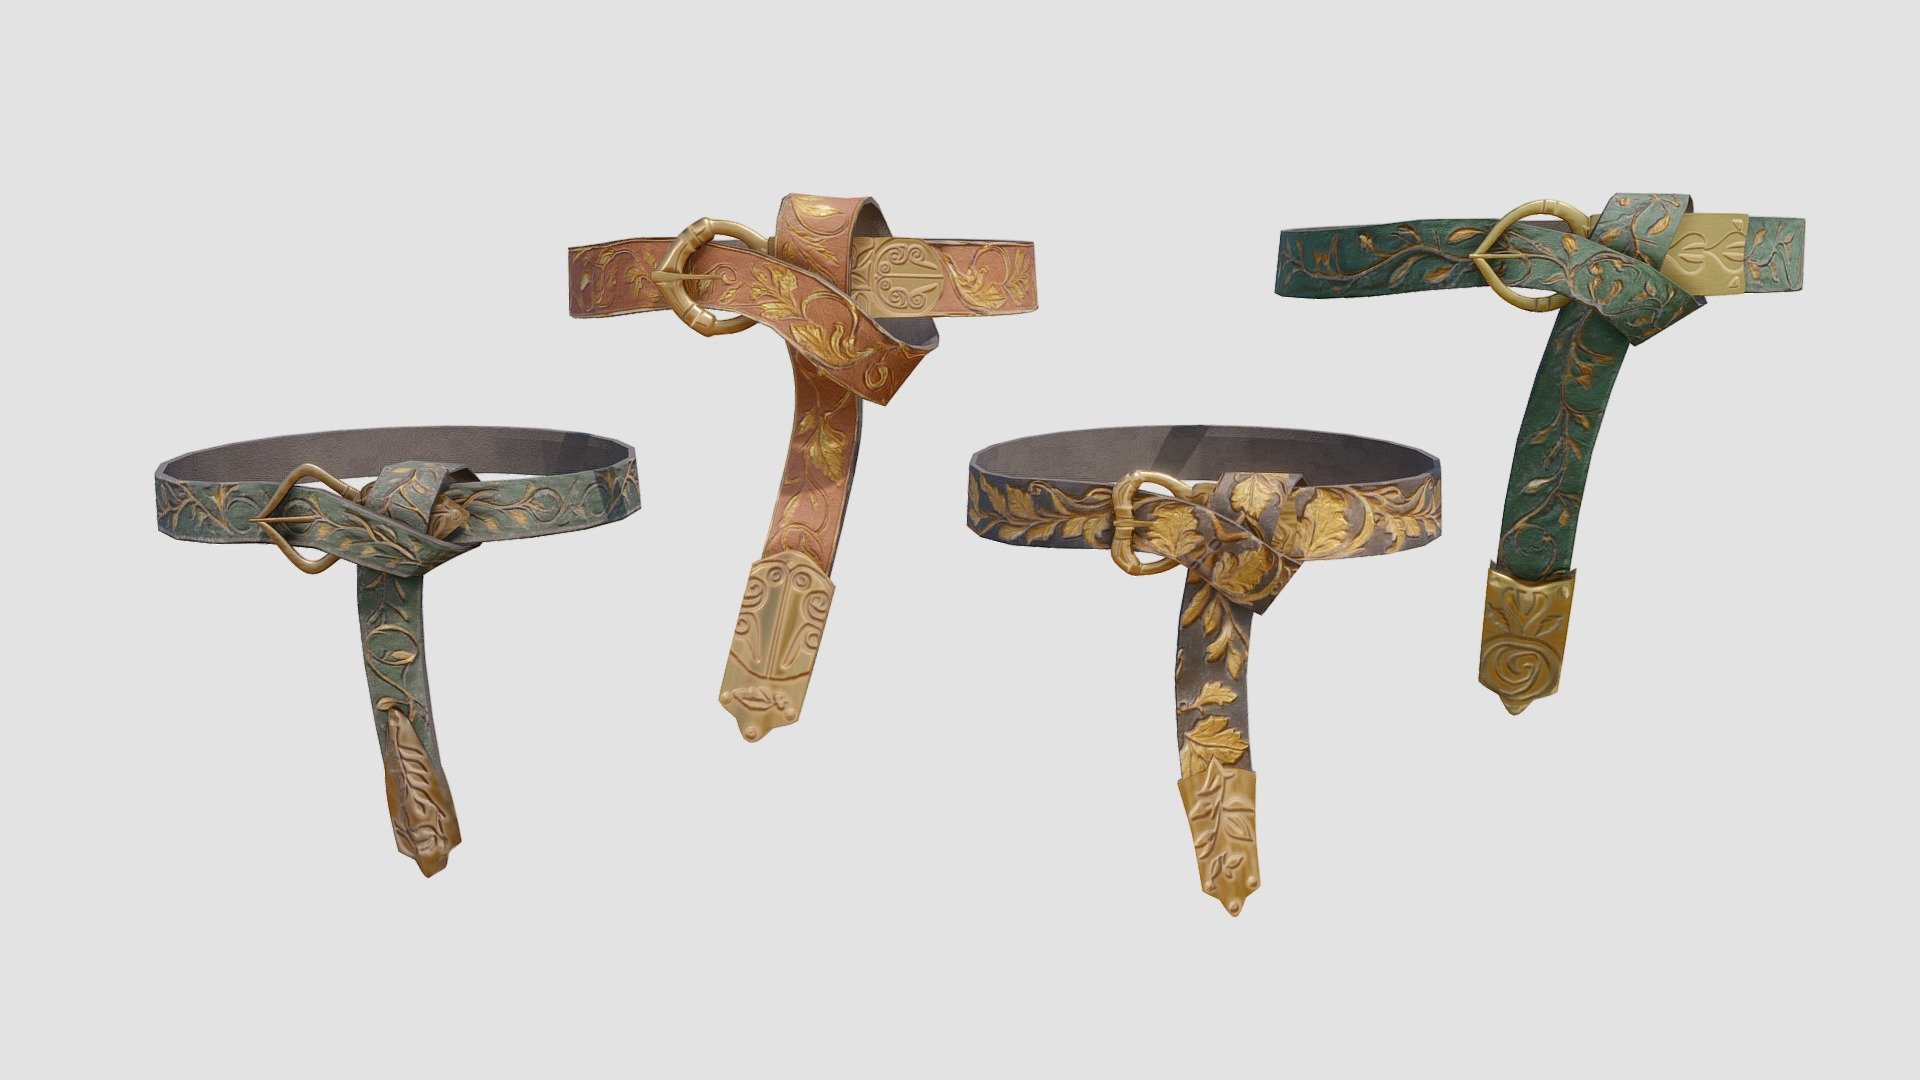 Check out my website for more products and better deals! 👉 SM5 by Heledahn 👈

This is a digital 3D model of a set of three Medieval-Fantasy belts, inspired by the style of Ancient Rome. The belts are made of embossed leather, with beautiful floral shapes painted in gold. The buckles are large golden medallions, that hold the belt without piercing the leather.

🔹 Includes curve modifier to pose belt!

This product will achieve realistic results in your rendering projects, being greatly suited for close-ups due to their high quality topology and PBR shading 3d model